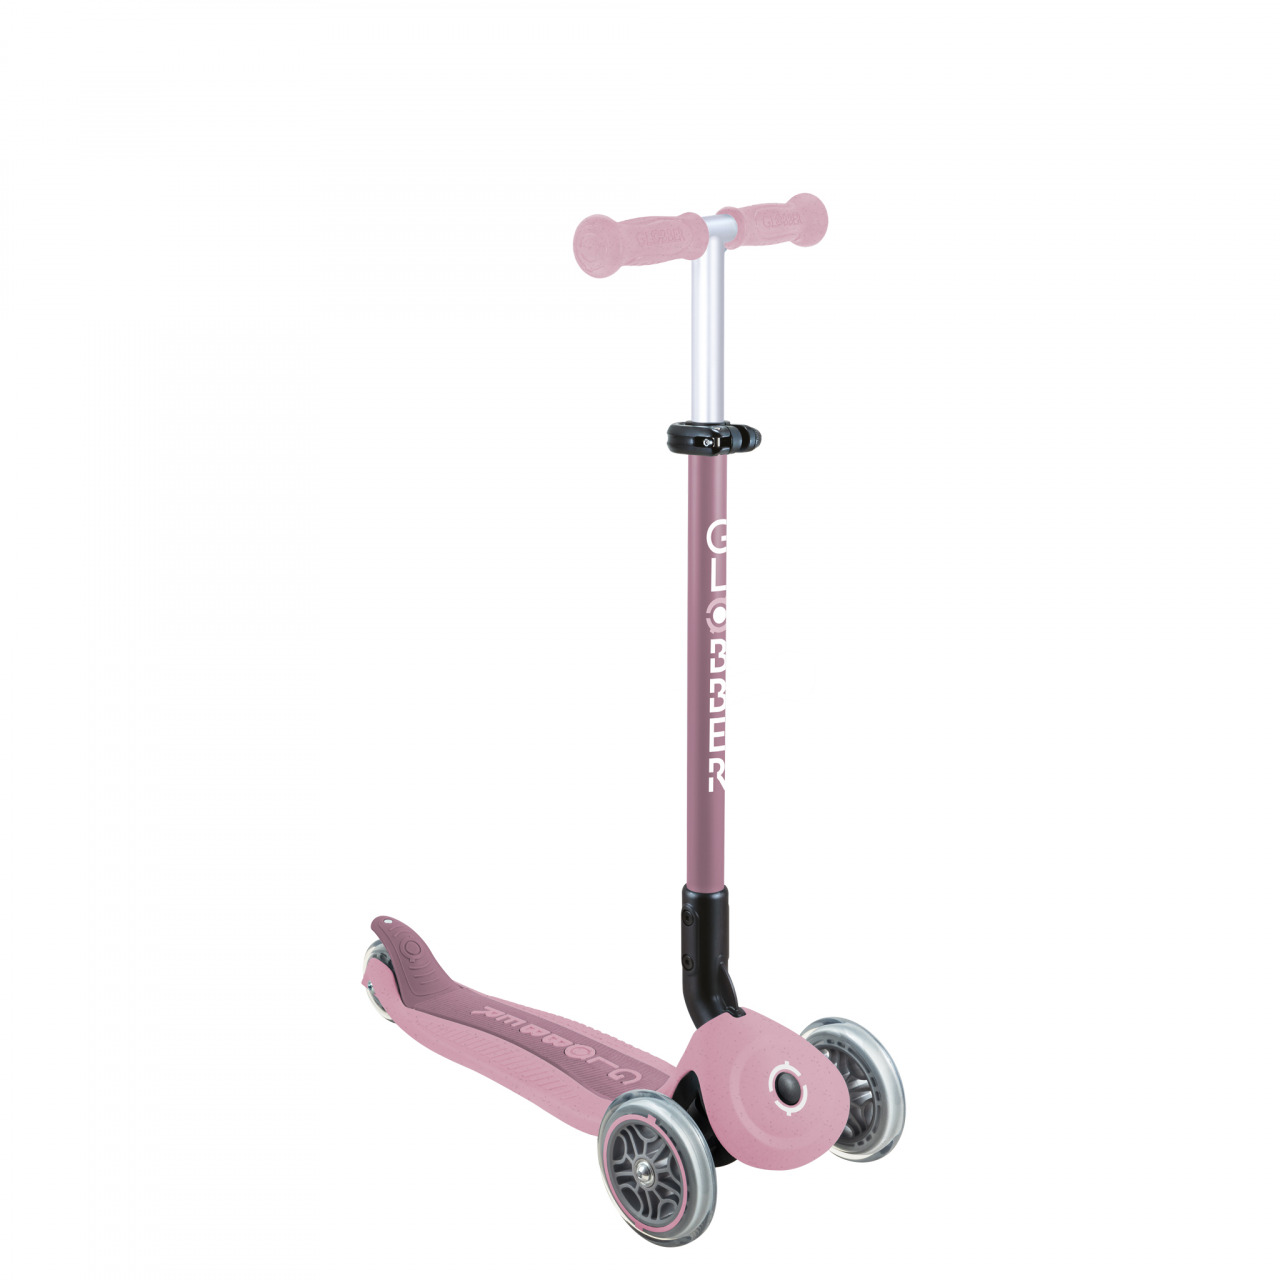 740 510 Eco Kid Scooter